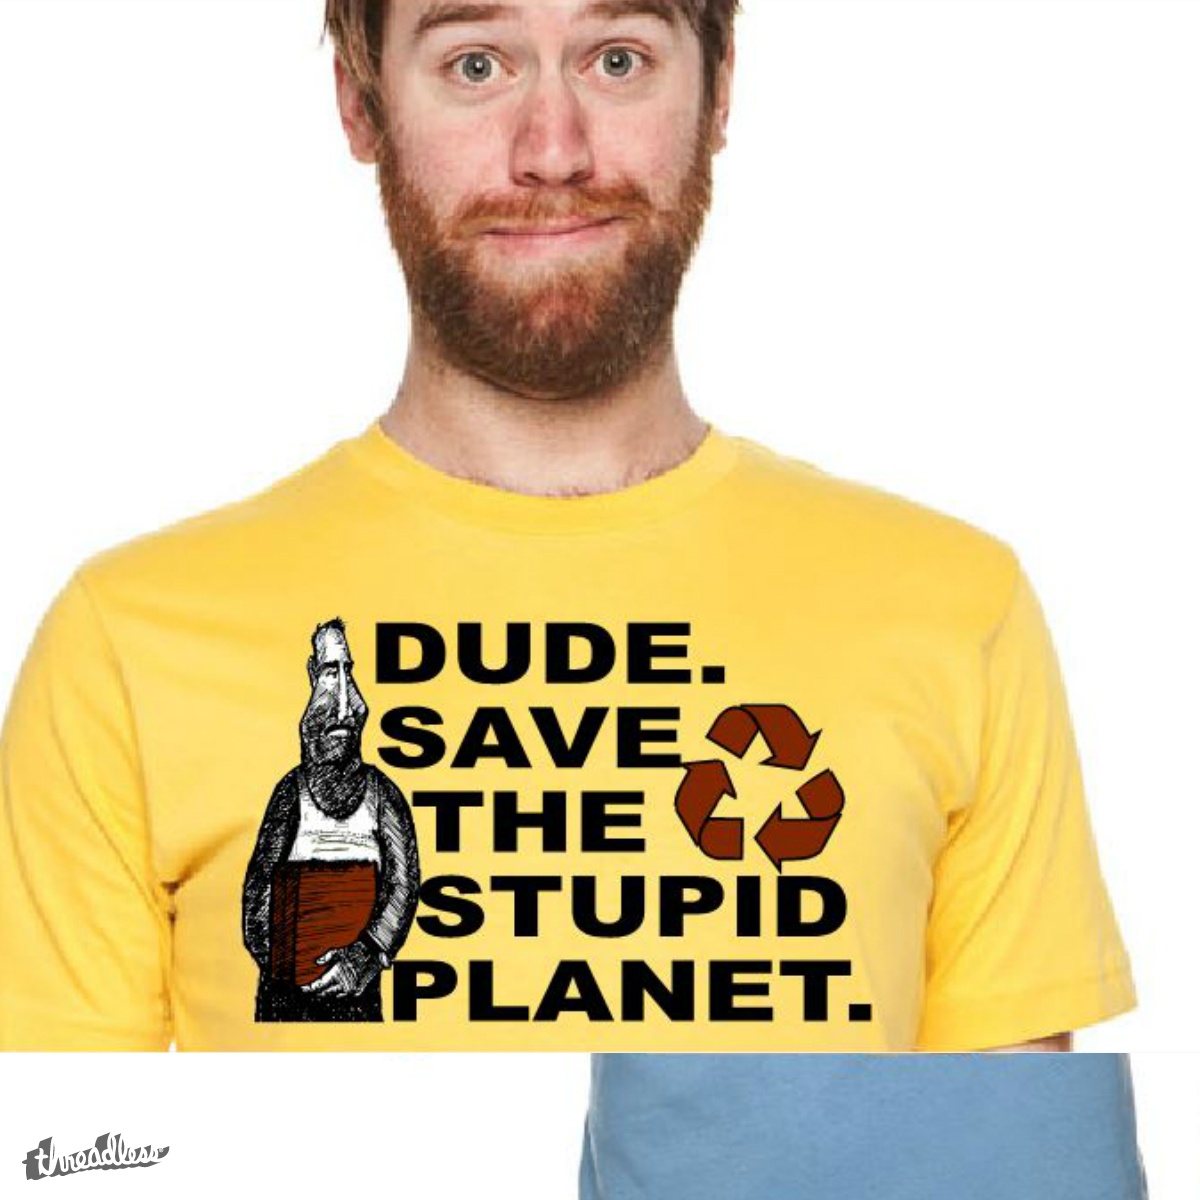 Save The Planet, a cool t-shirt design